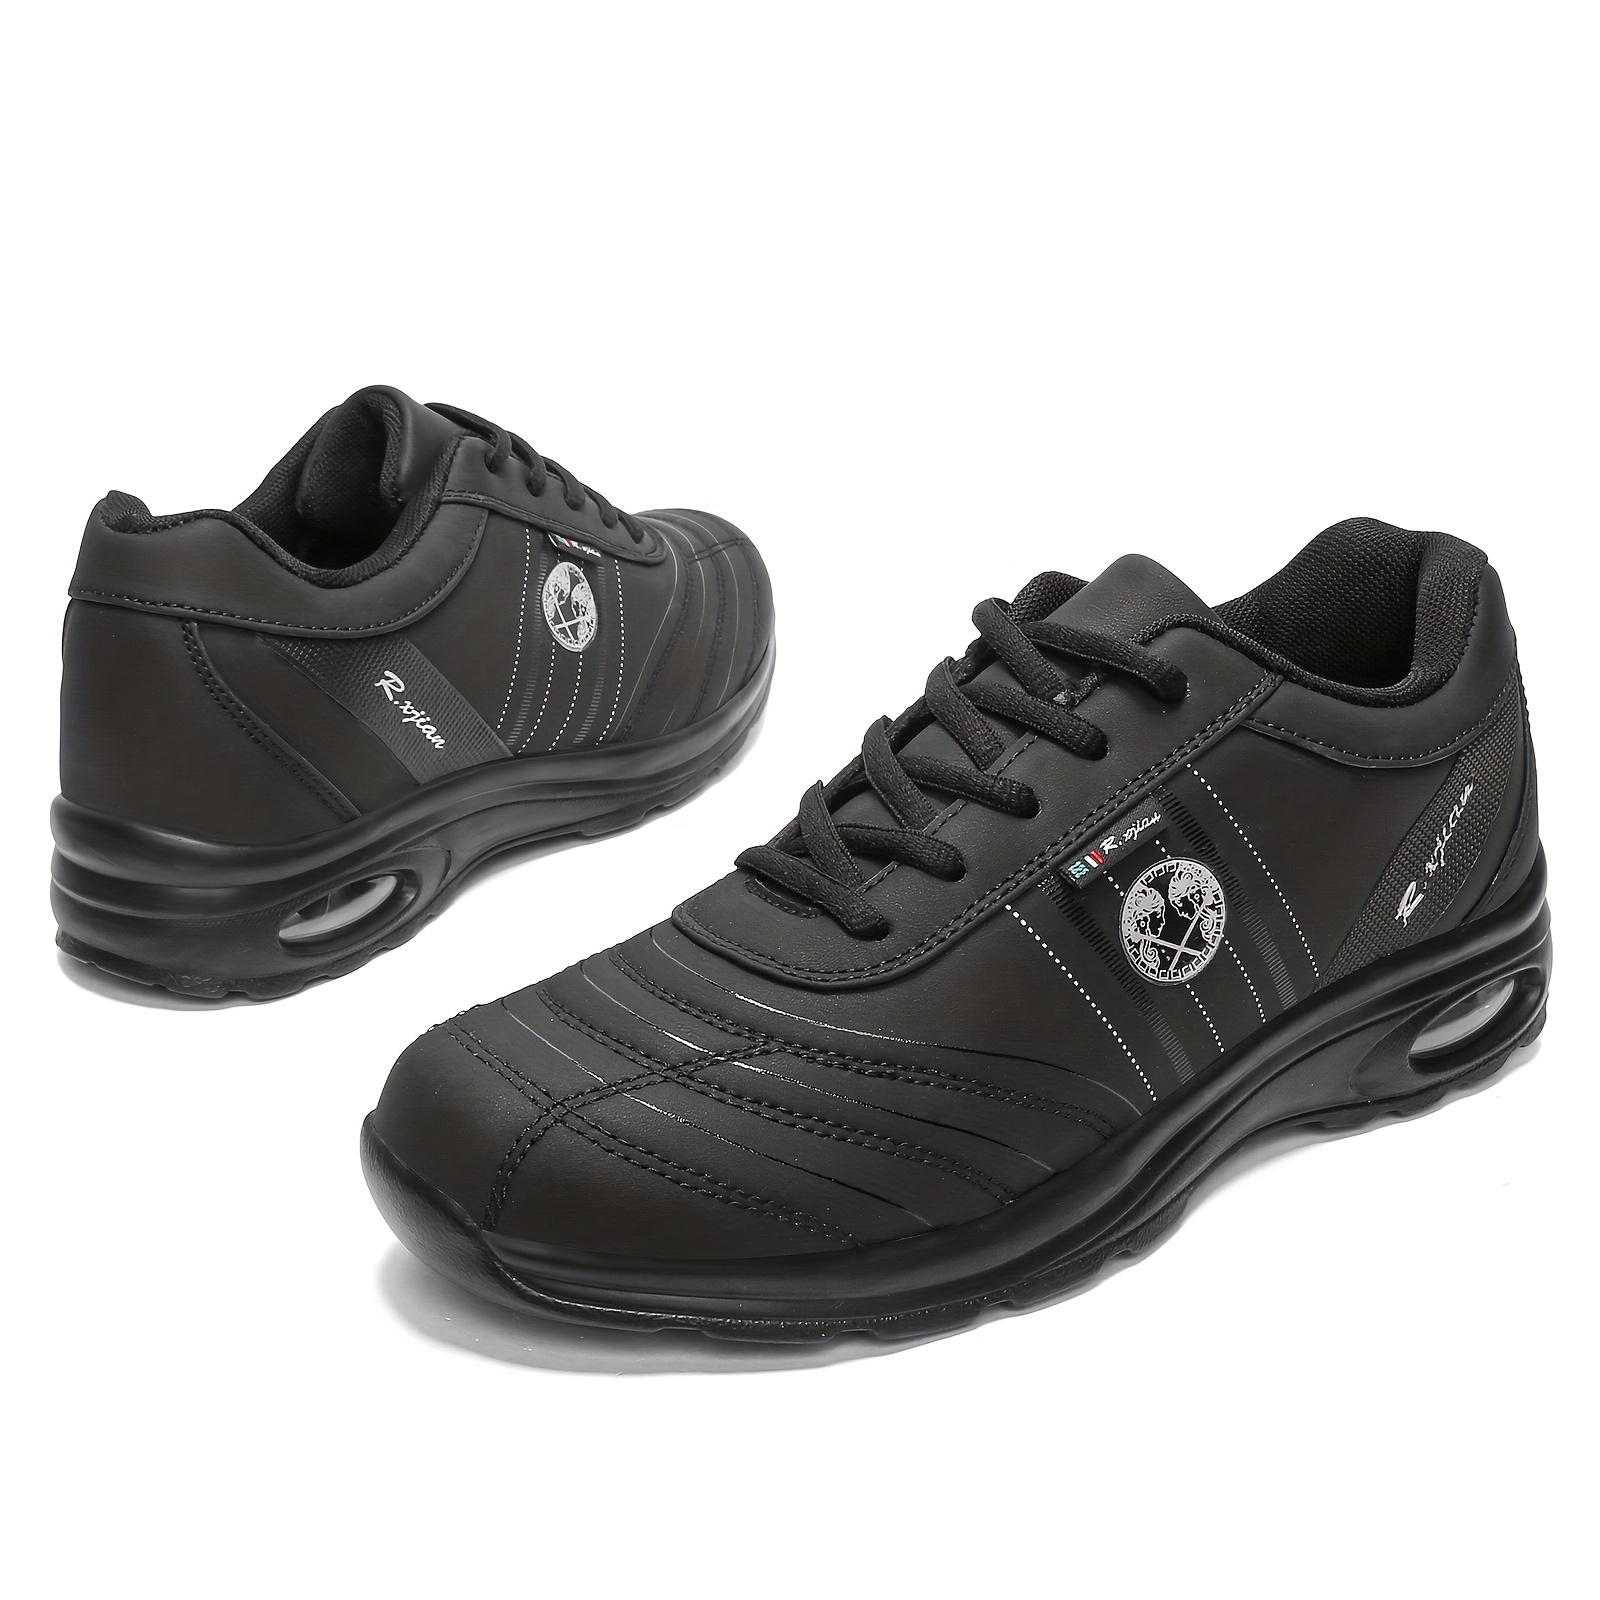 lightweight non slip golf shoes for men perfect for outdoor sports running walking and hiking all year round